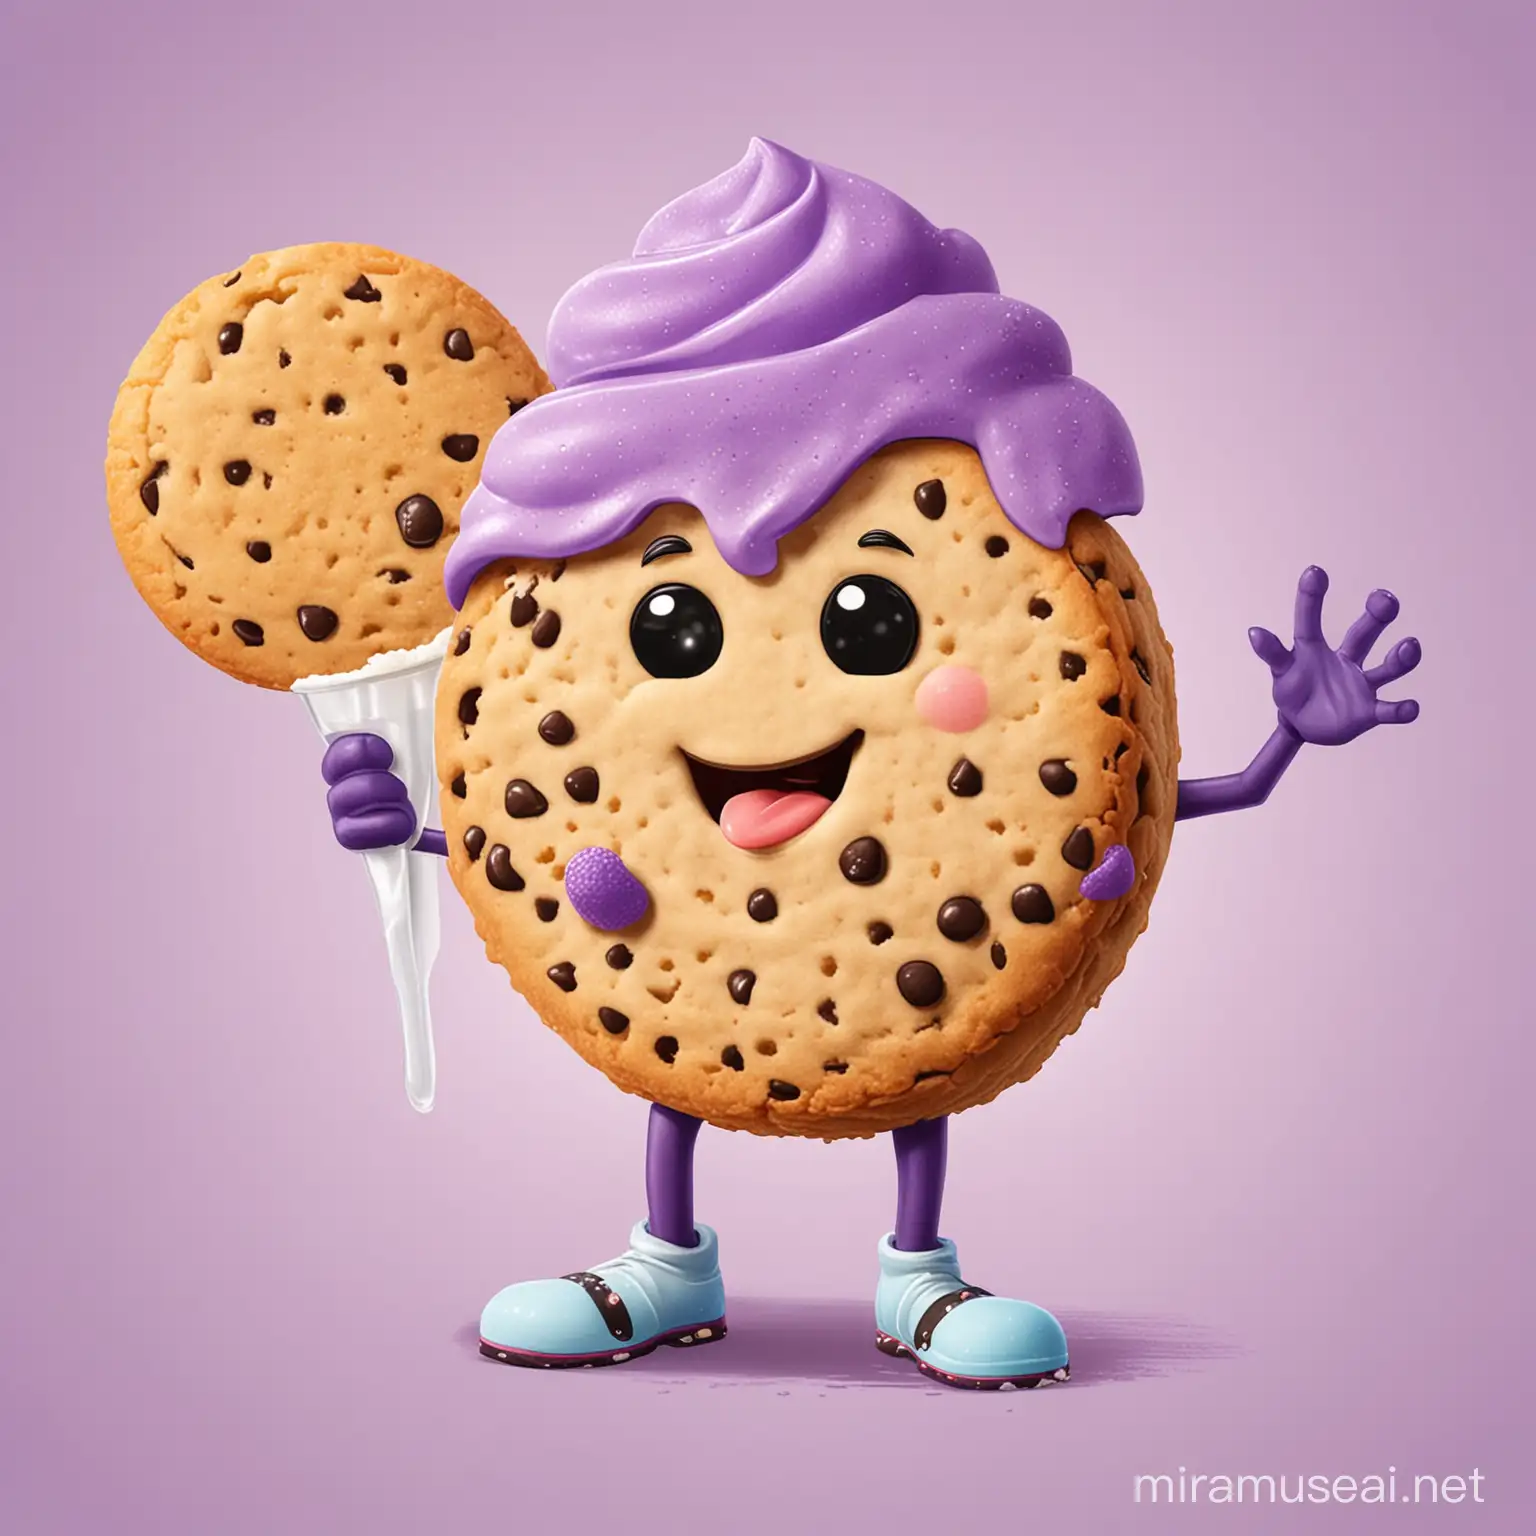 Cartoon character of a cookie, taro chips and shaved flavored ice